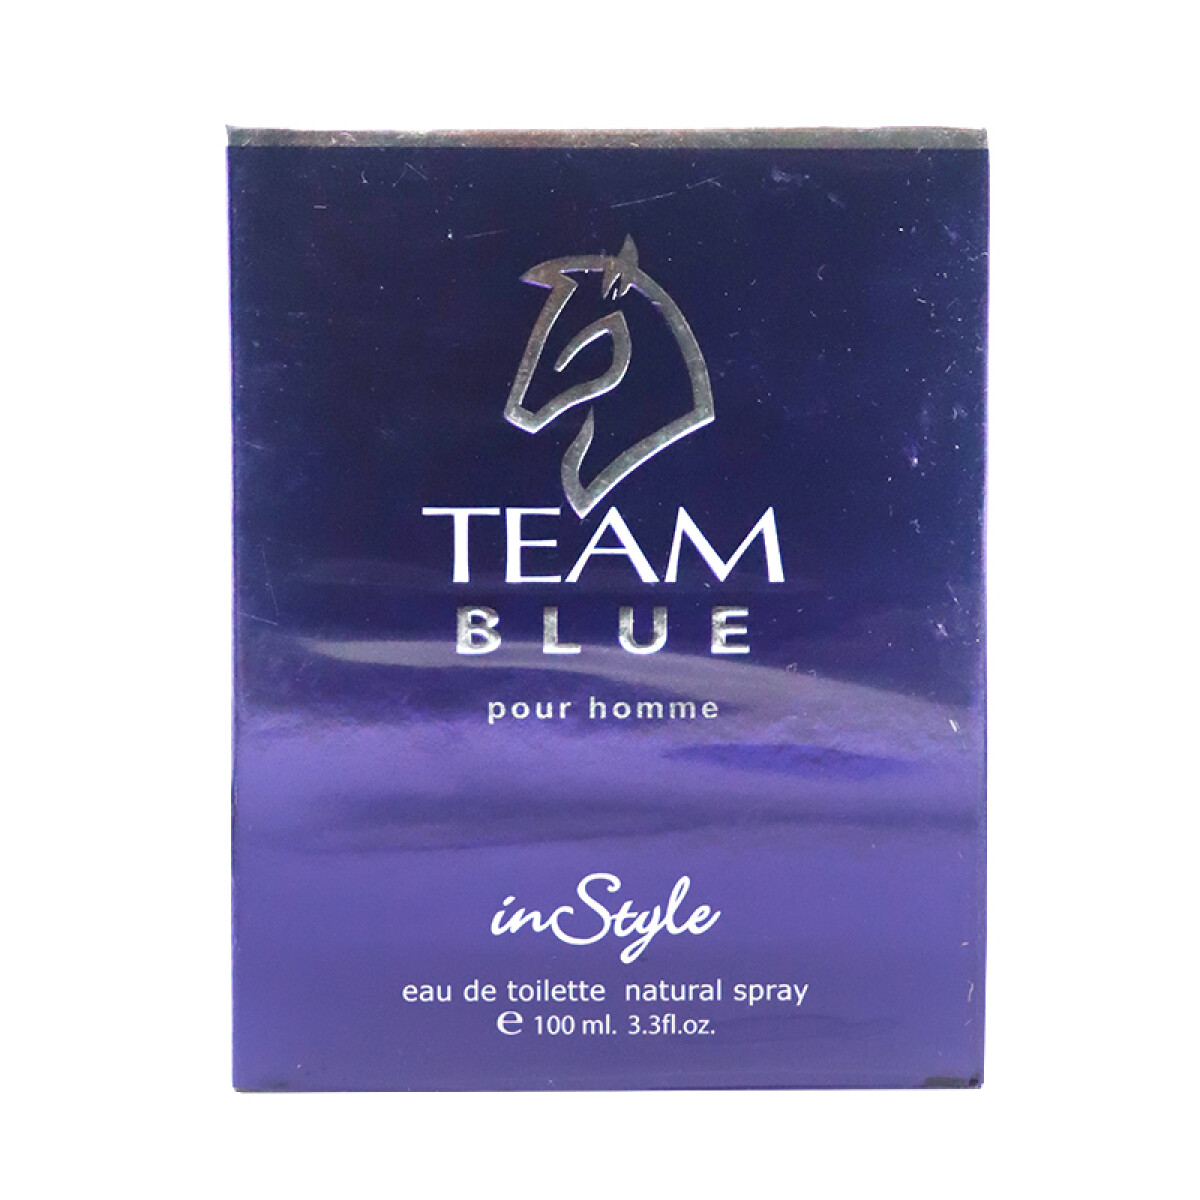 Perfume IN STYLE para hombre | 100 ml - Team Blue 